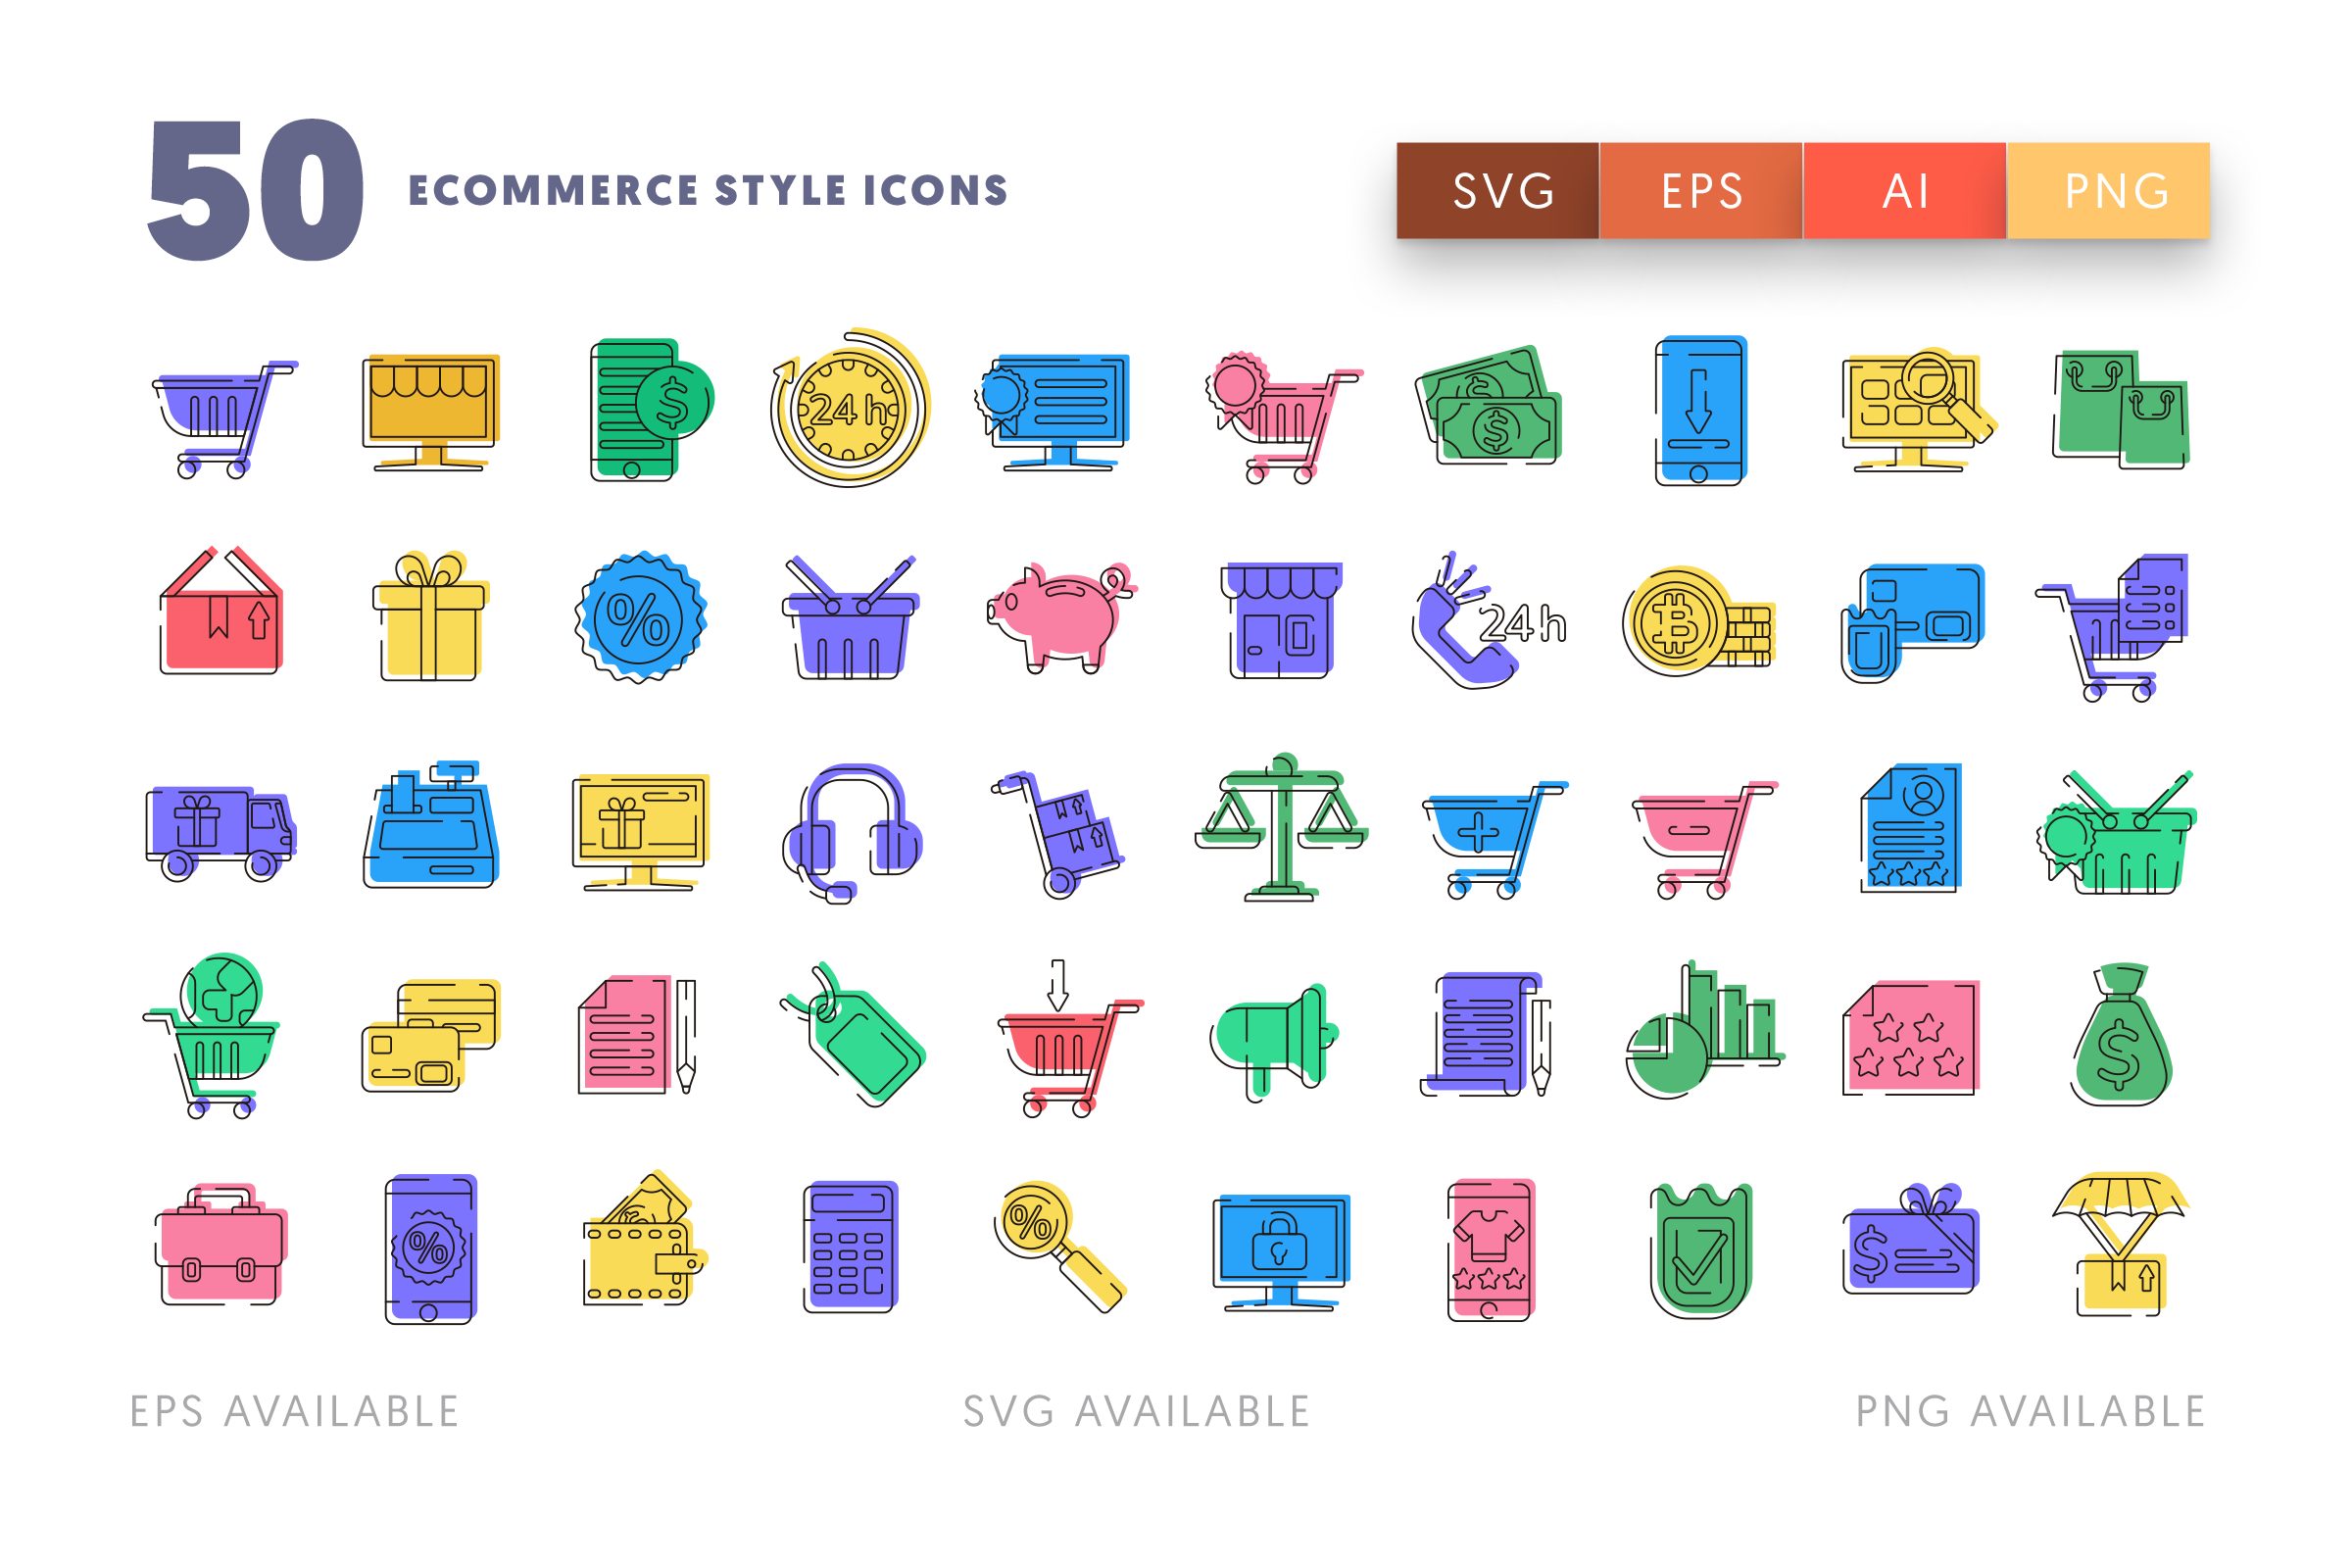 Ecommerce Style icons png/svg/eps